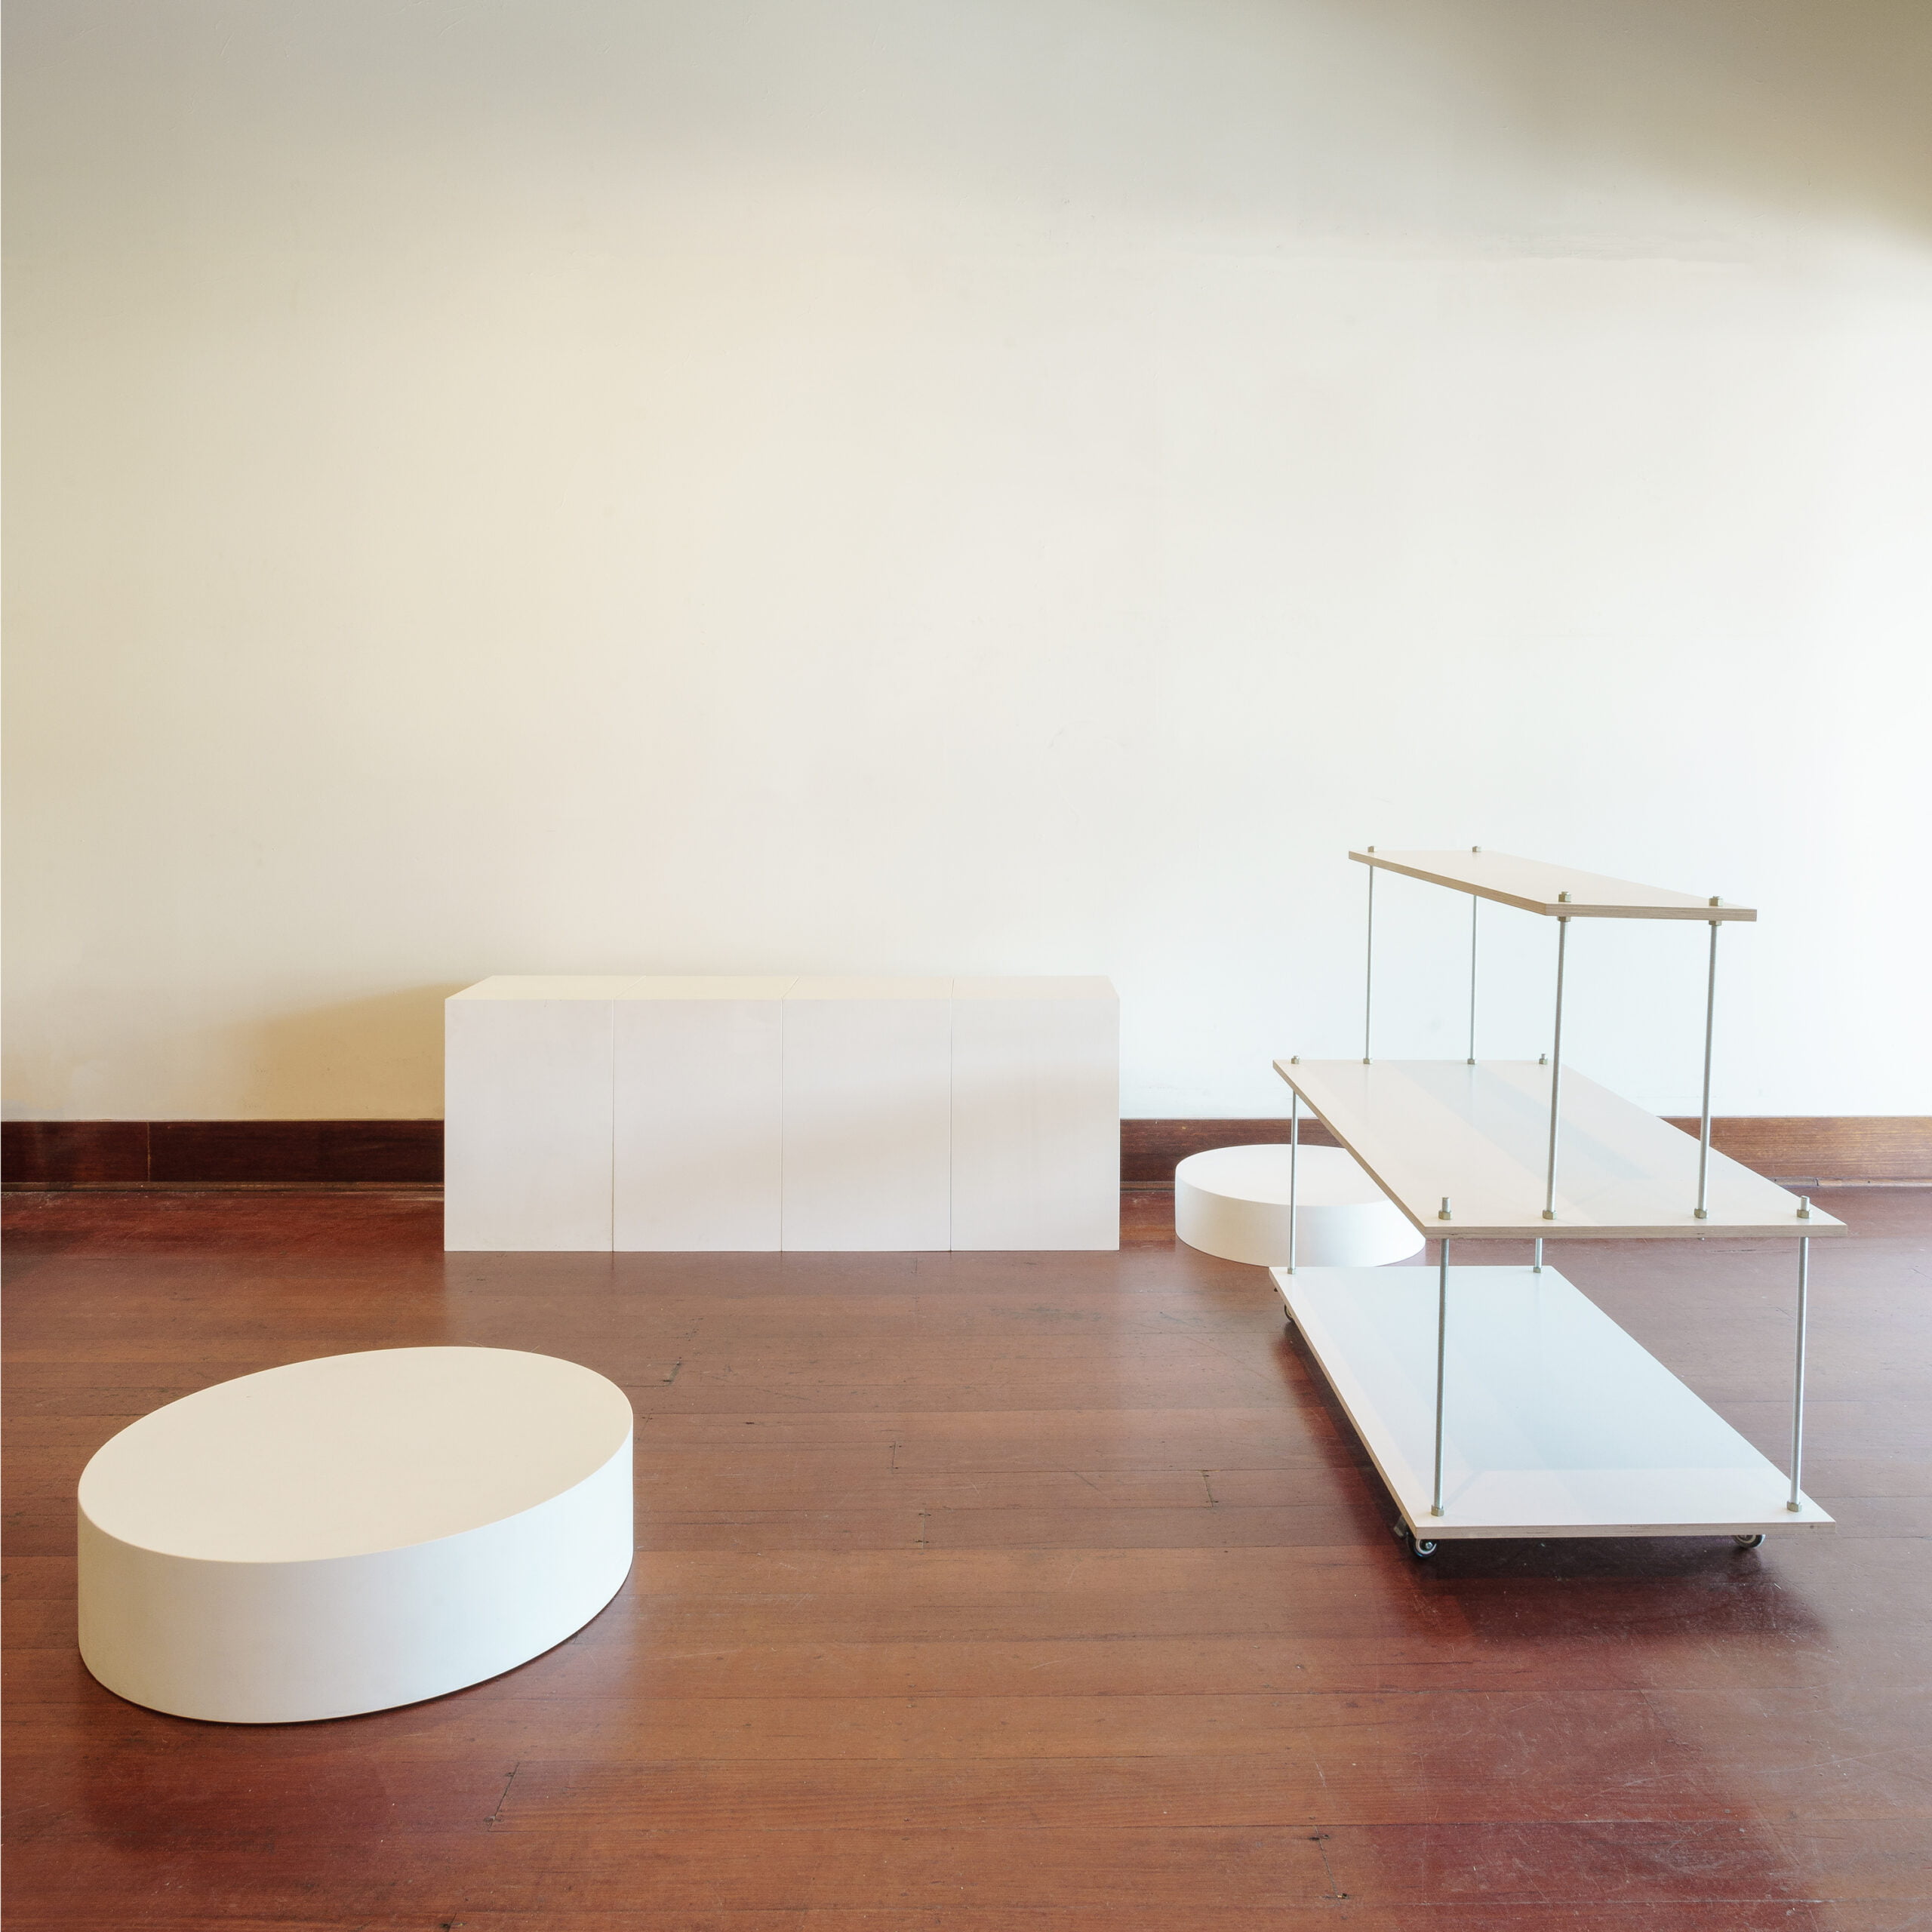 four white plinths, one white centered floating stand and two round platform risers